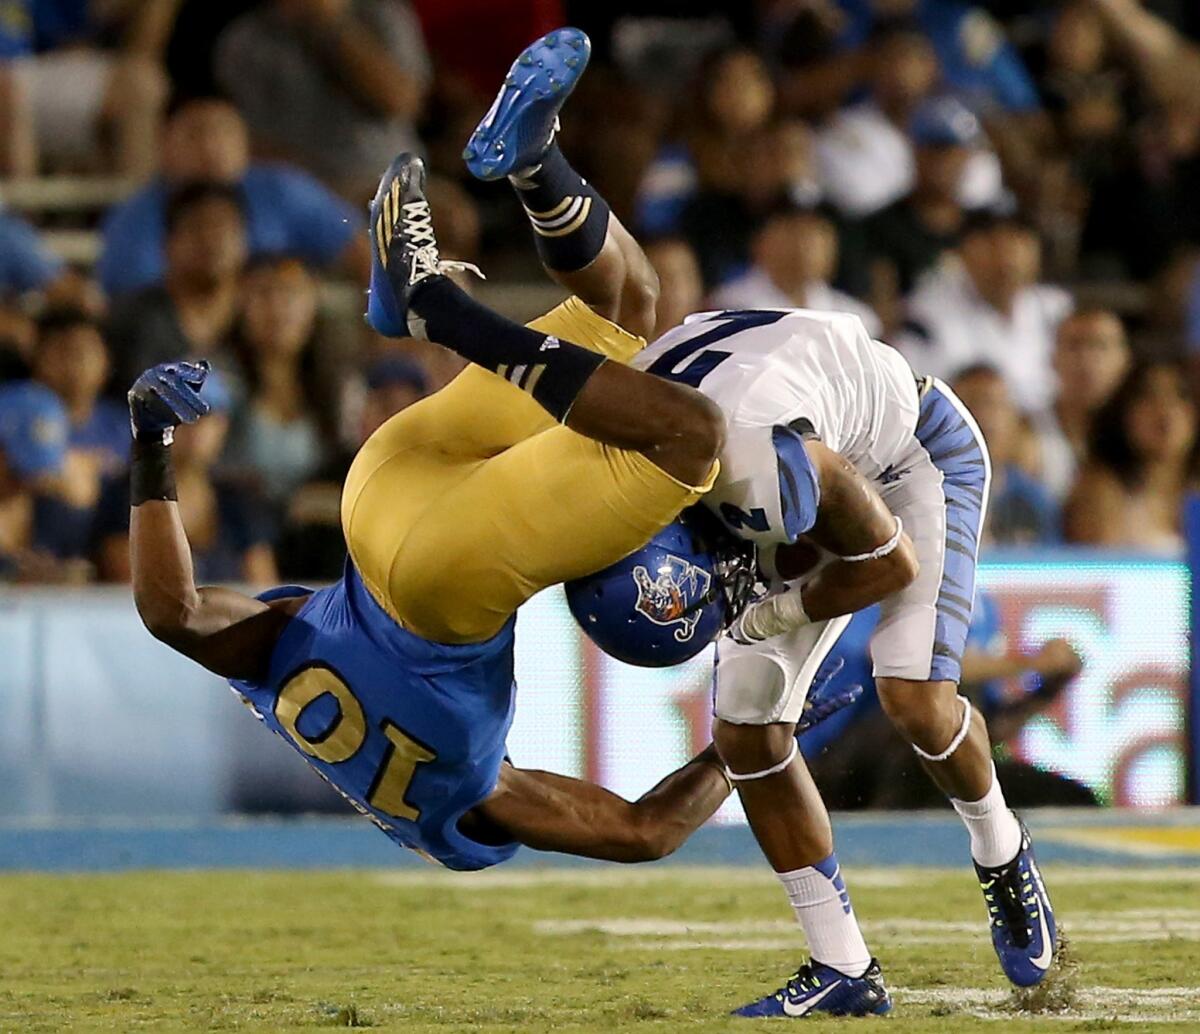 UCLA defensive back Fabian Moreau flips over Memphis receiver Joe Craig after he made a catch in the first quarter Saturday night at the Rose Bowl.